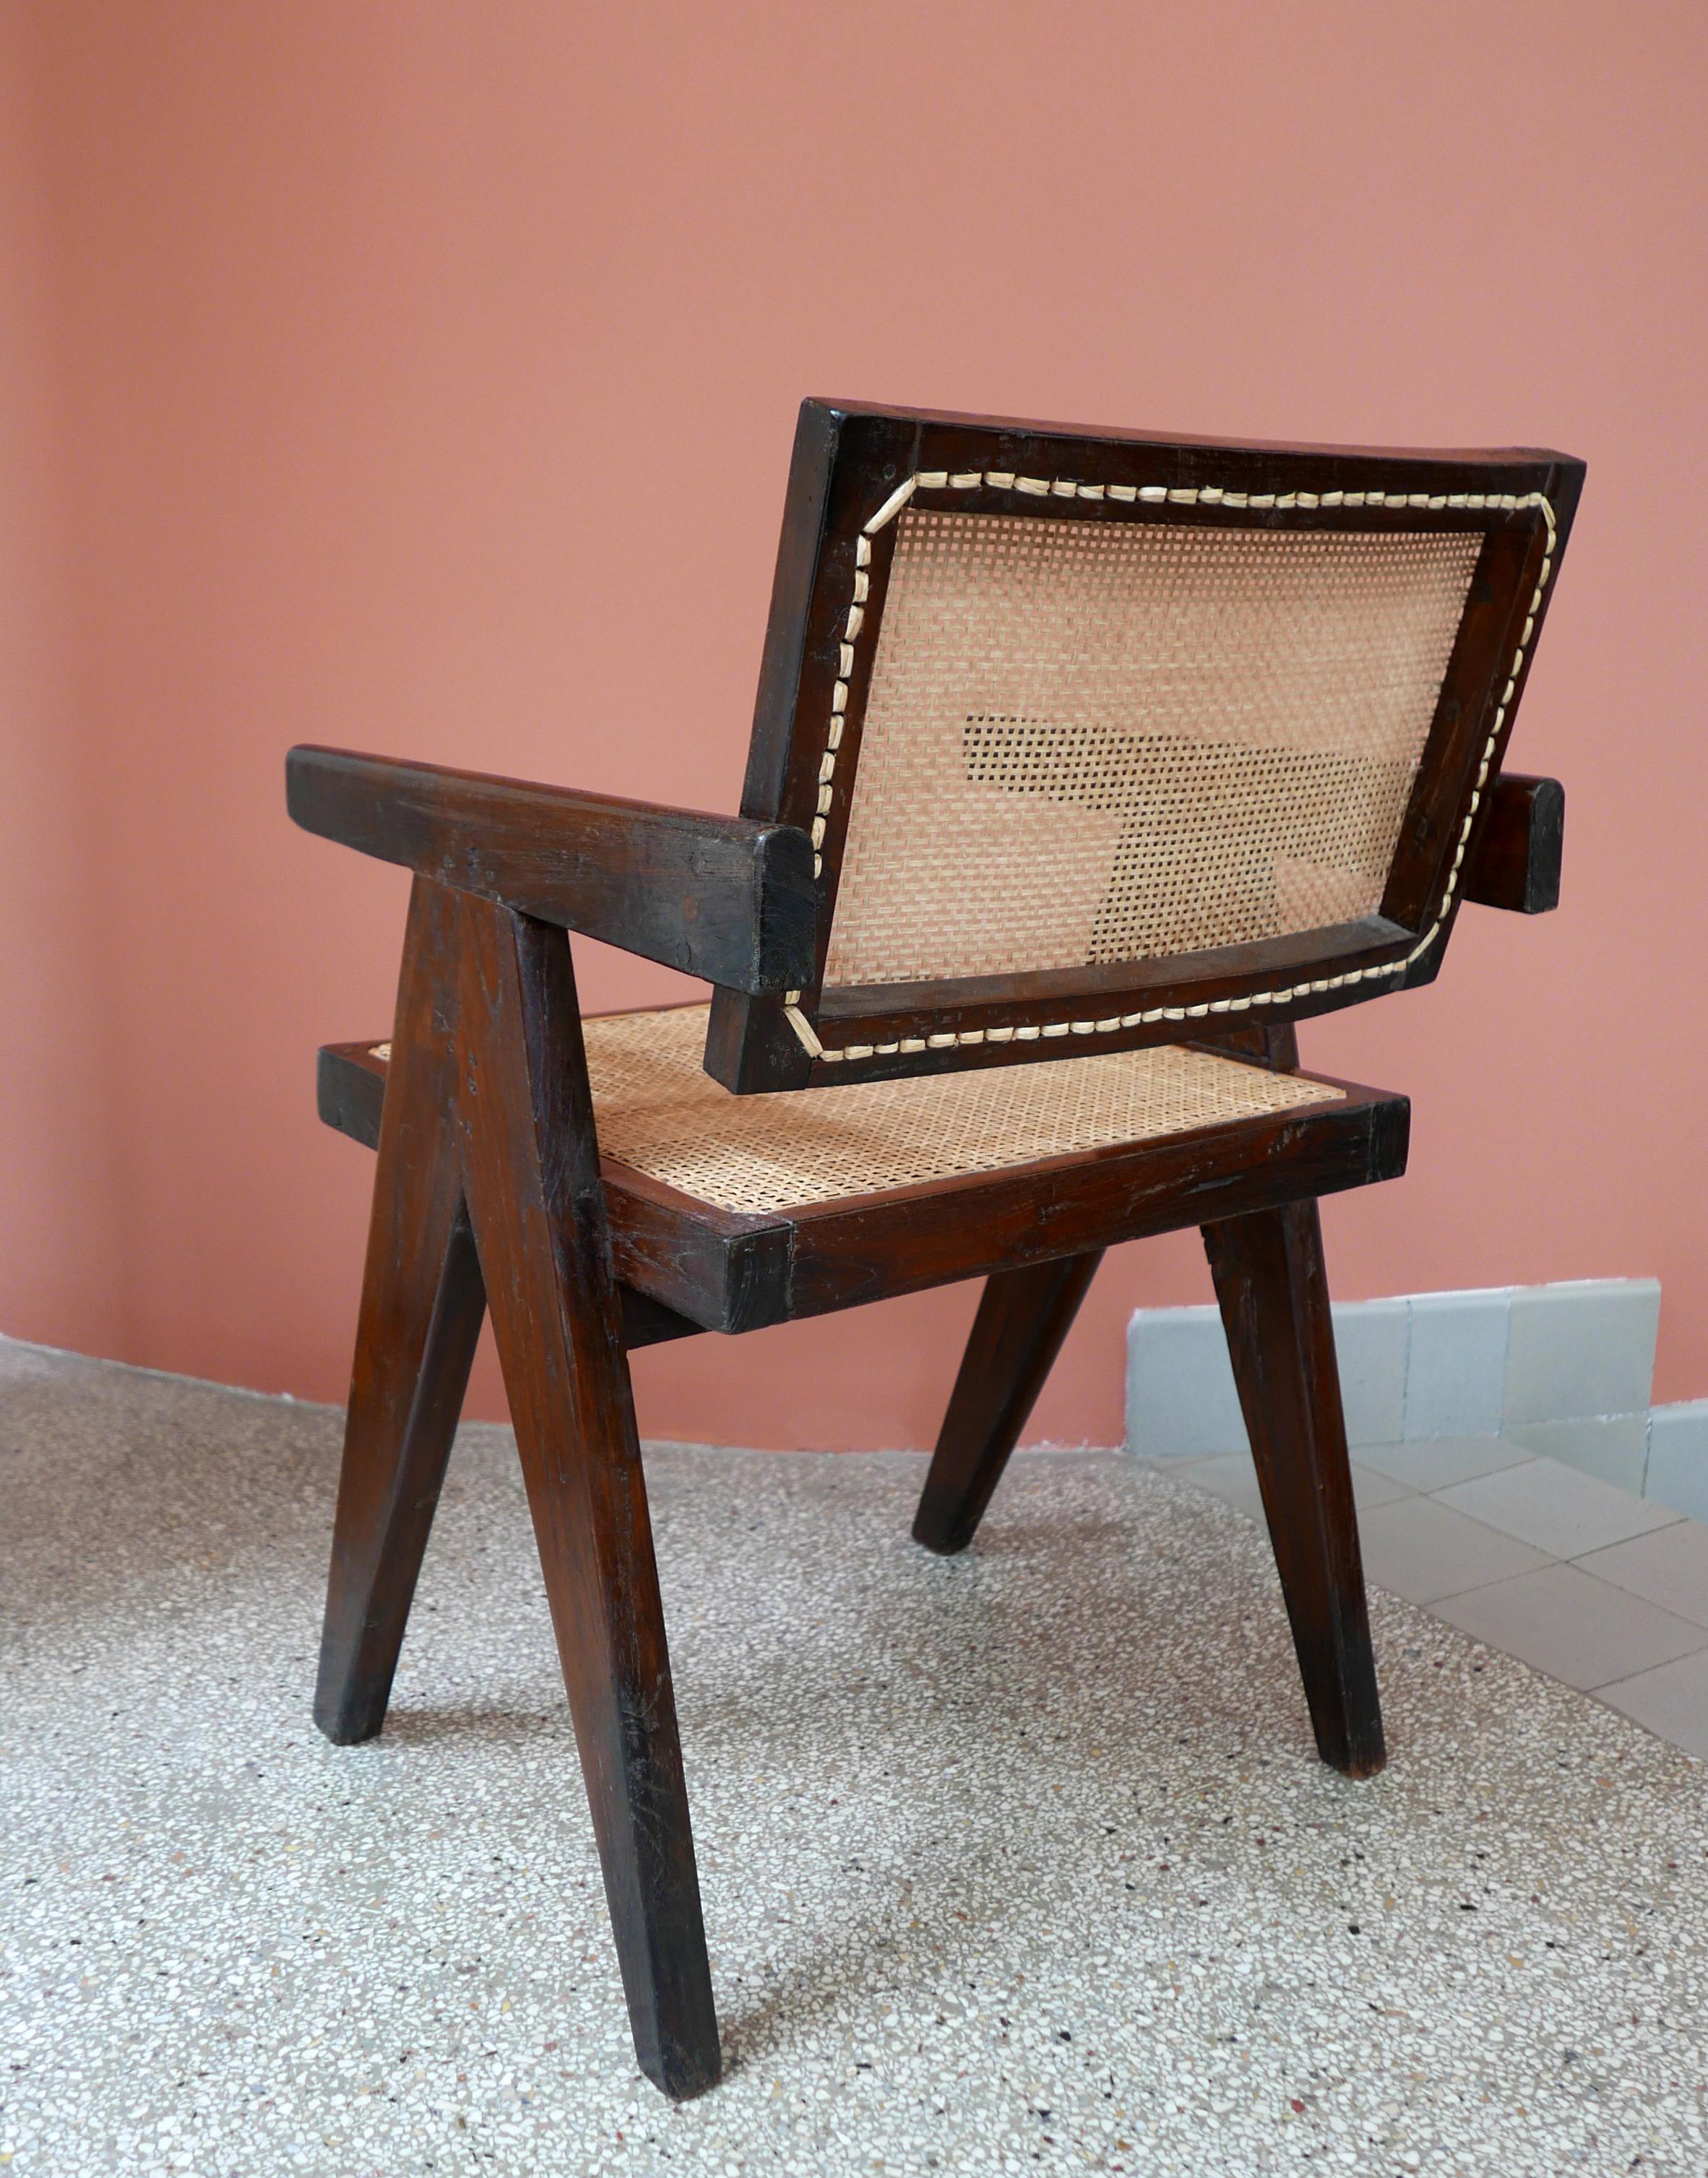 Indian Pierre Jeanneret, Office Cane Chair, PJ-SI-28-A, circa 1955